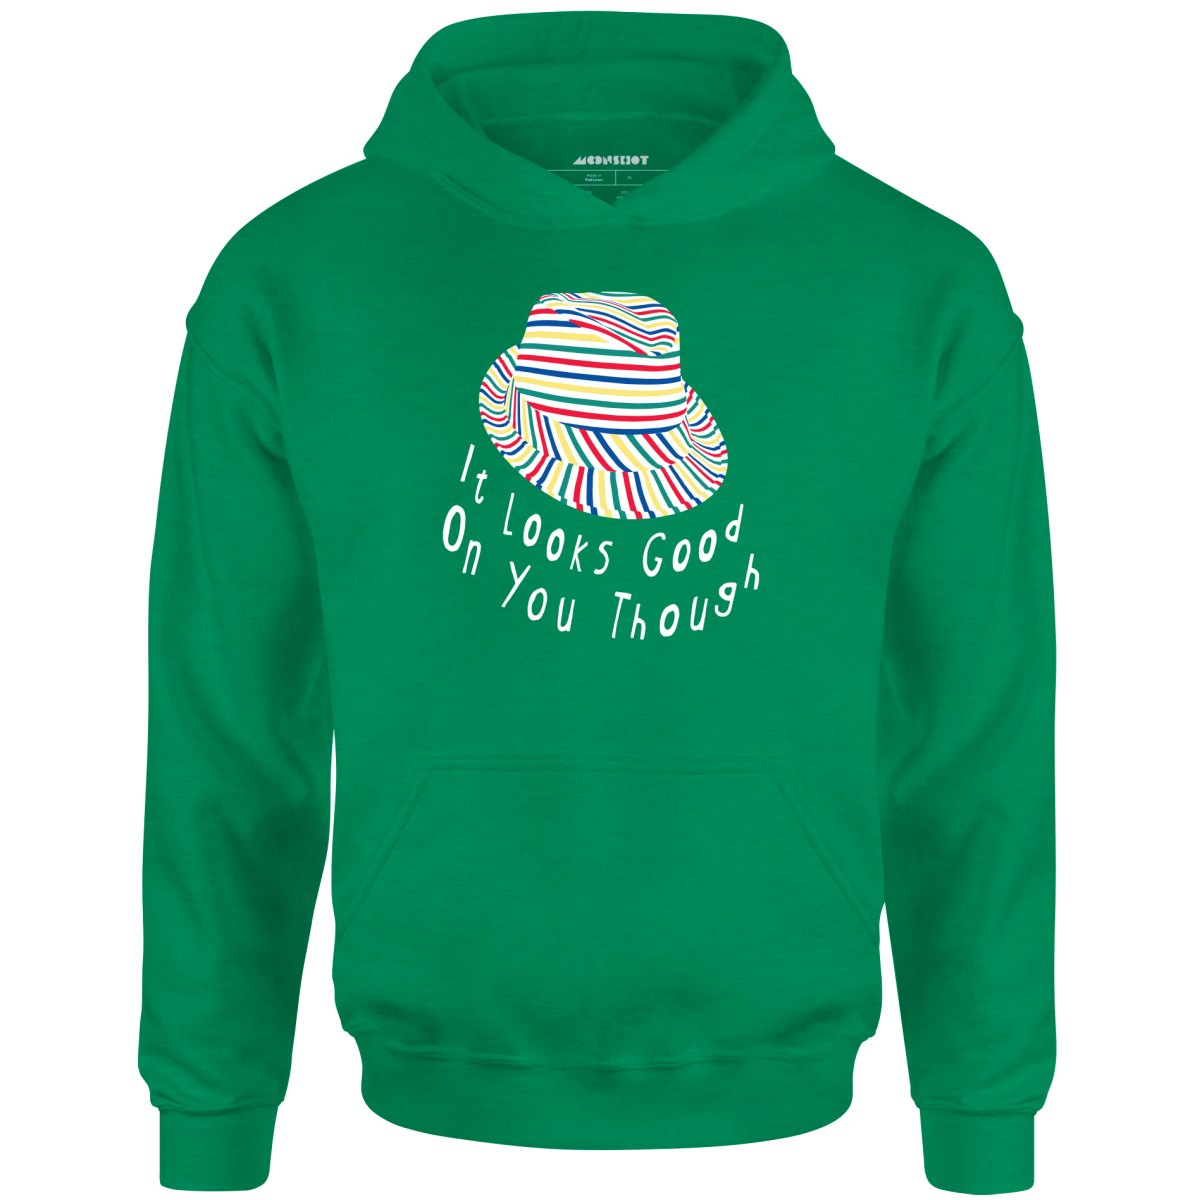 It Looks Good on You Though - Unisex Hoodie